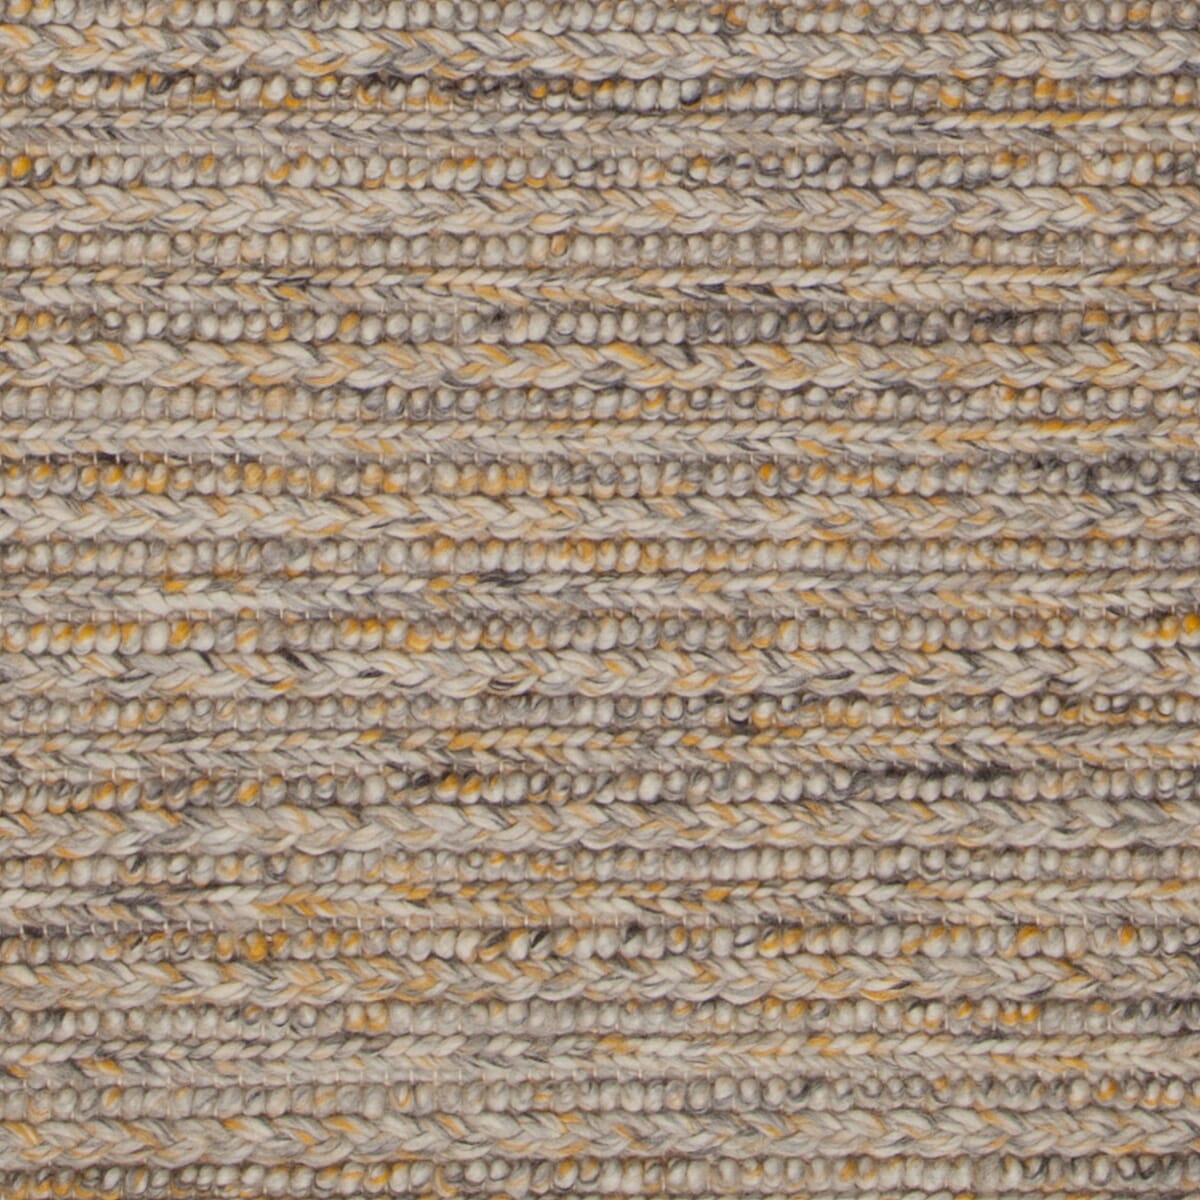 Chandra Sylvie Syl-48003 Yellow / Grey / White Solid Color Area Rug